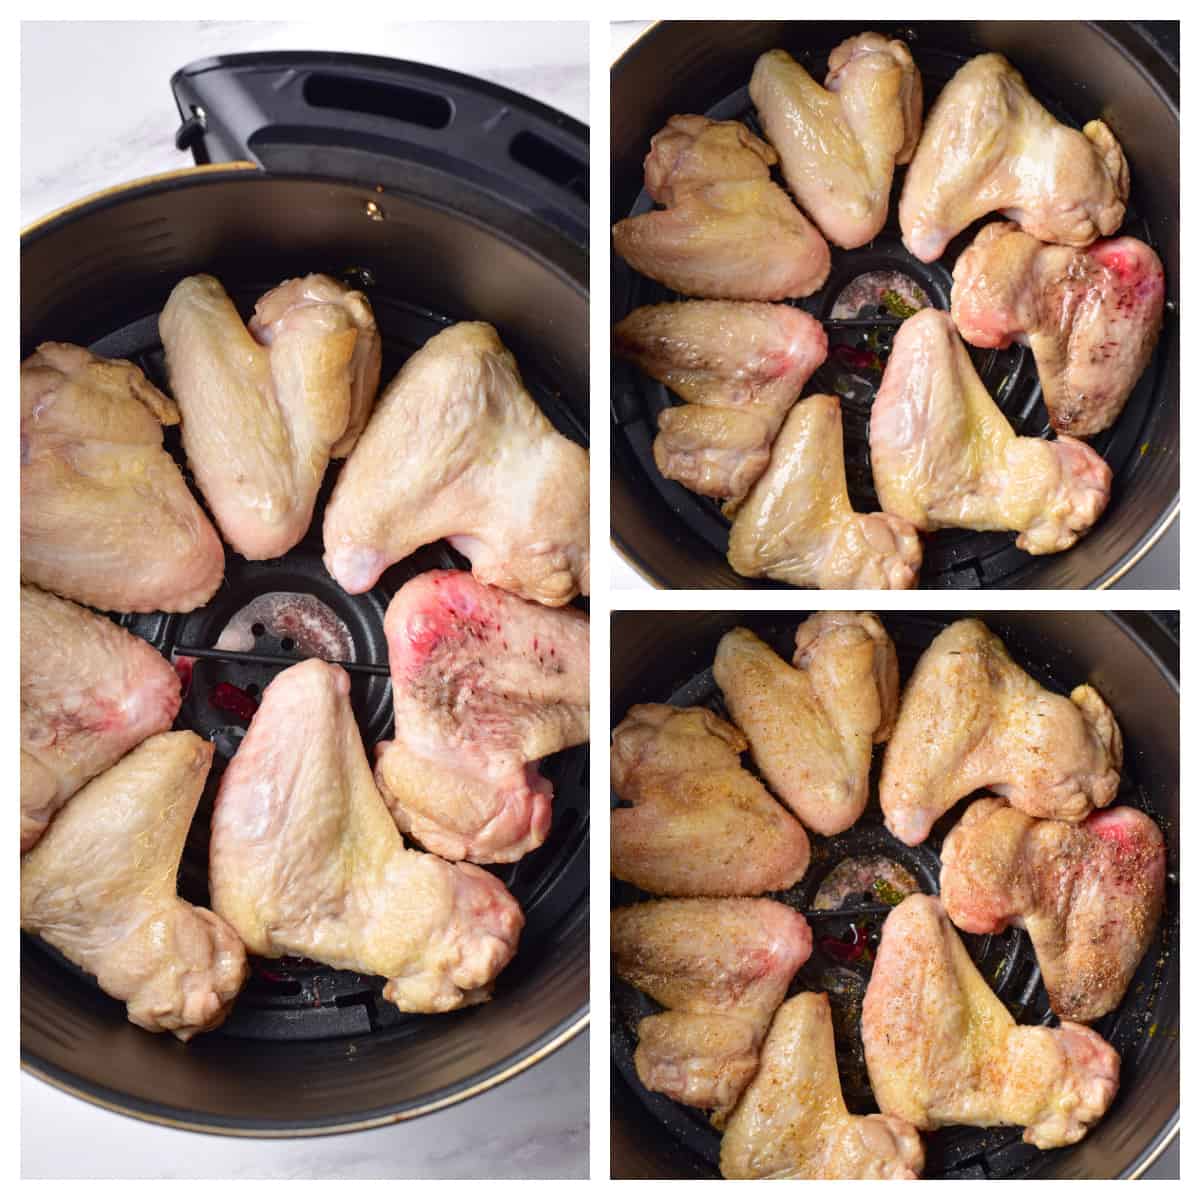 Stages of cooking frozen chicken wings.